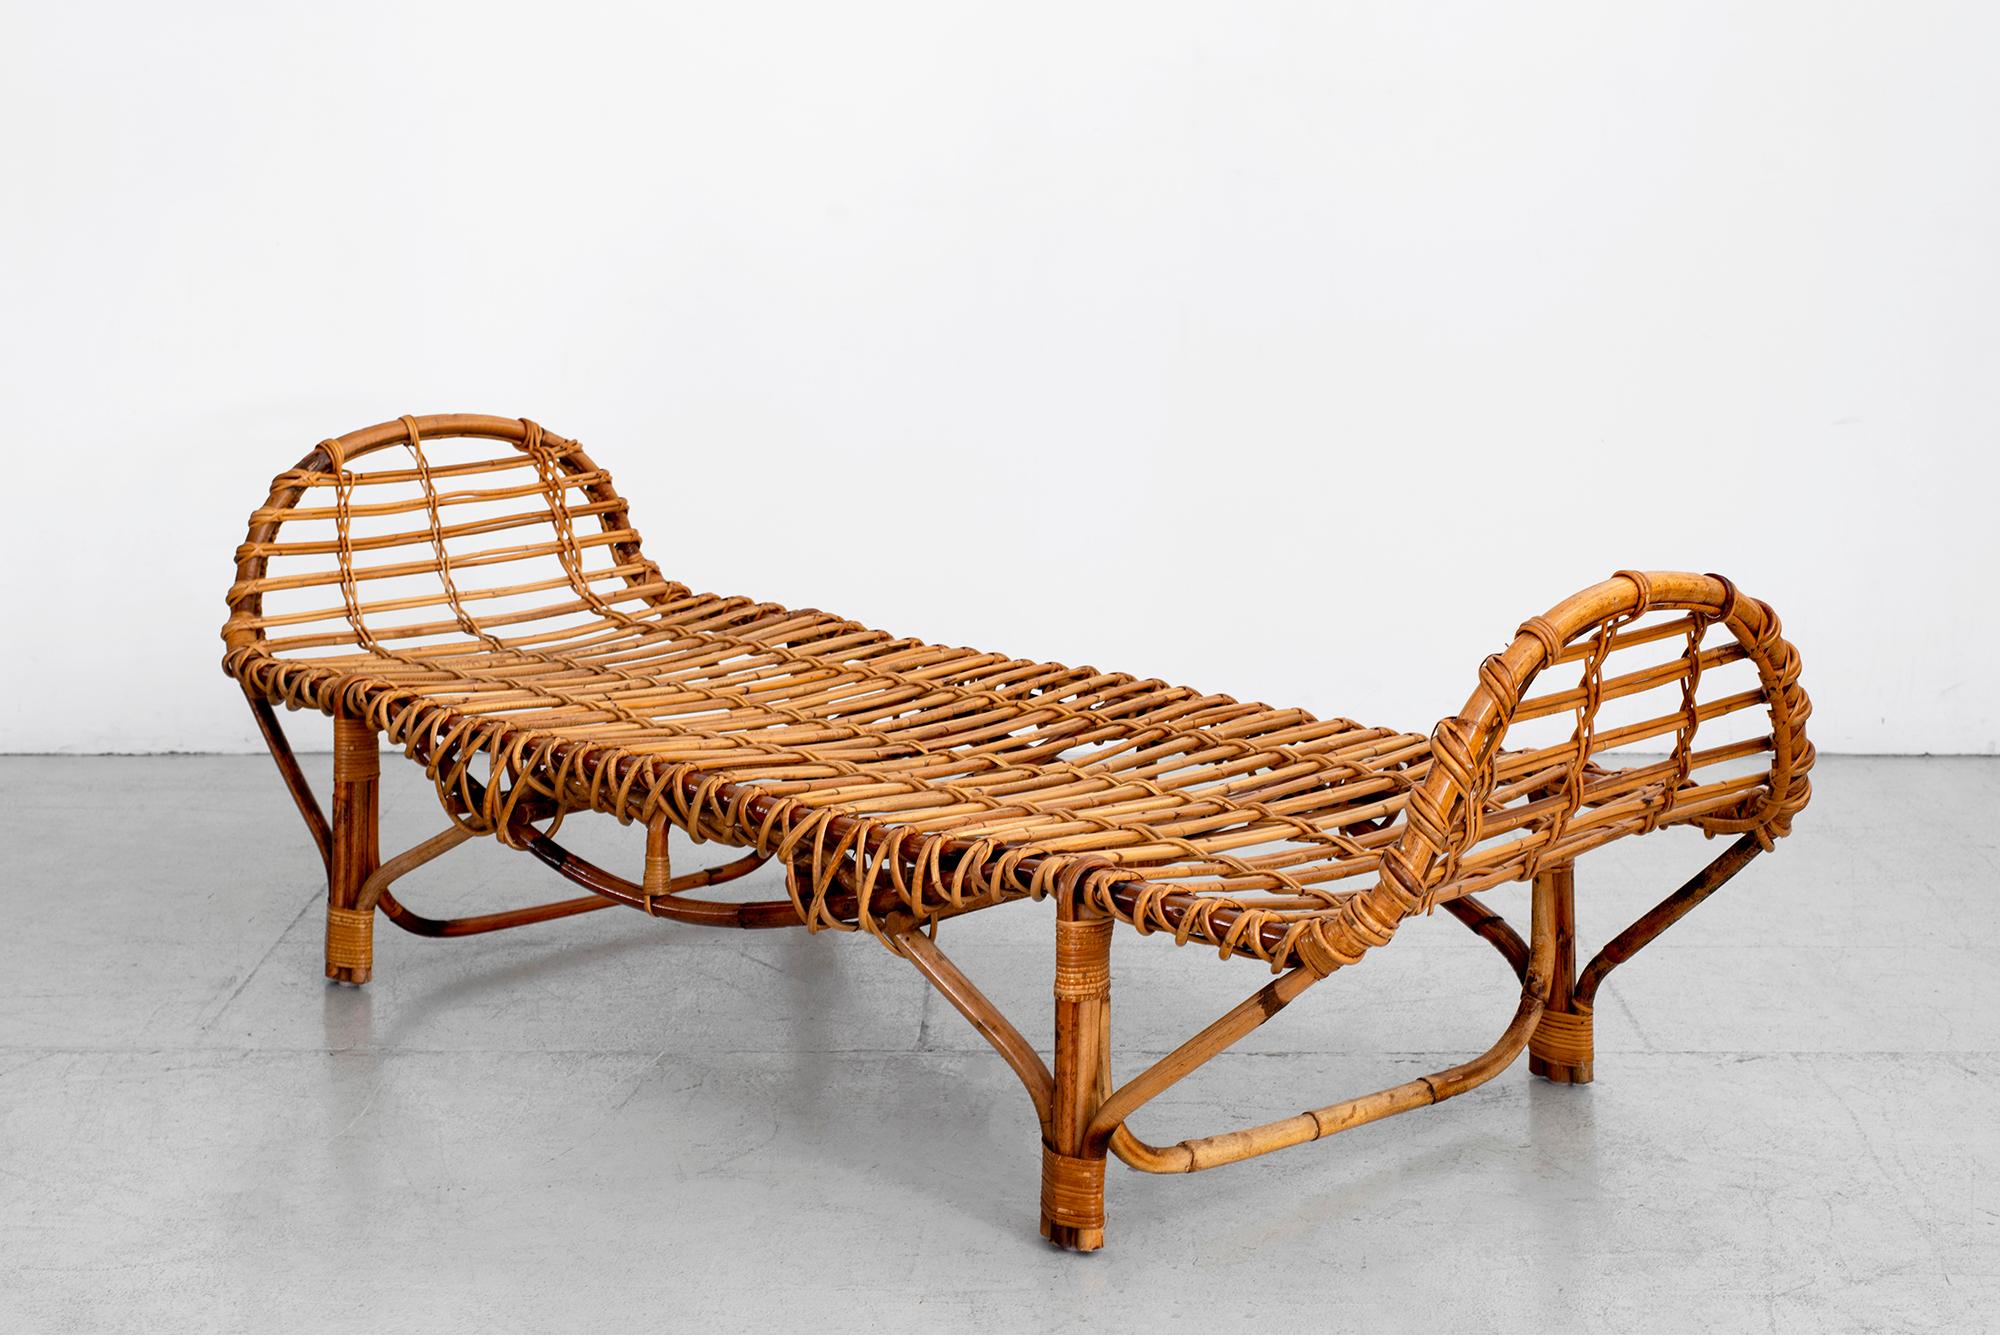 Italian rattan daybed by Lorenzo Forges Davanzati  for Bonacina. 
Great sculptural lines and craftsmanship.